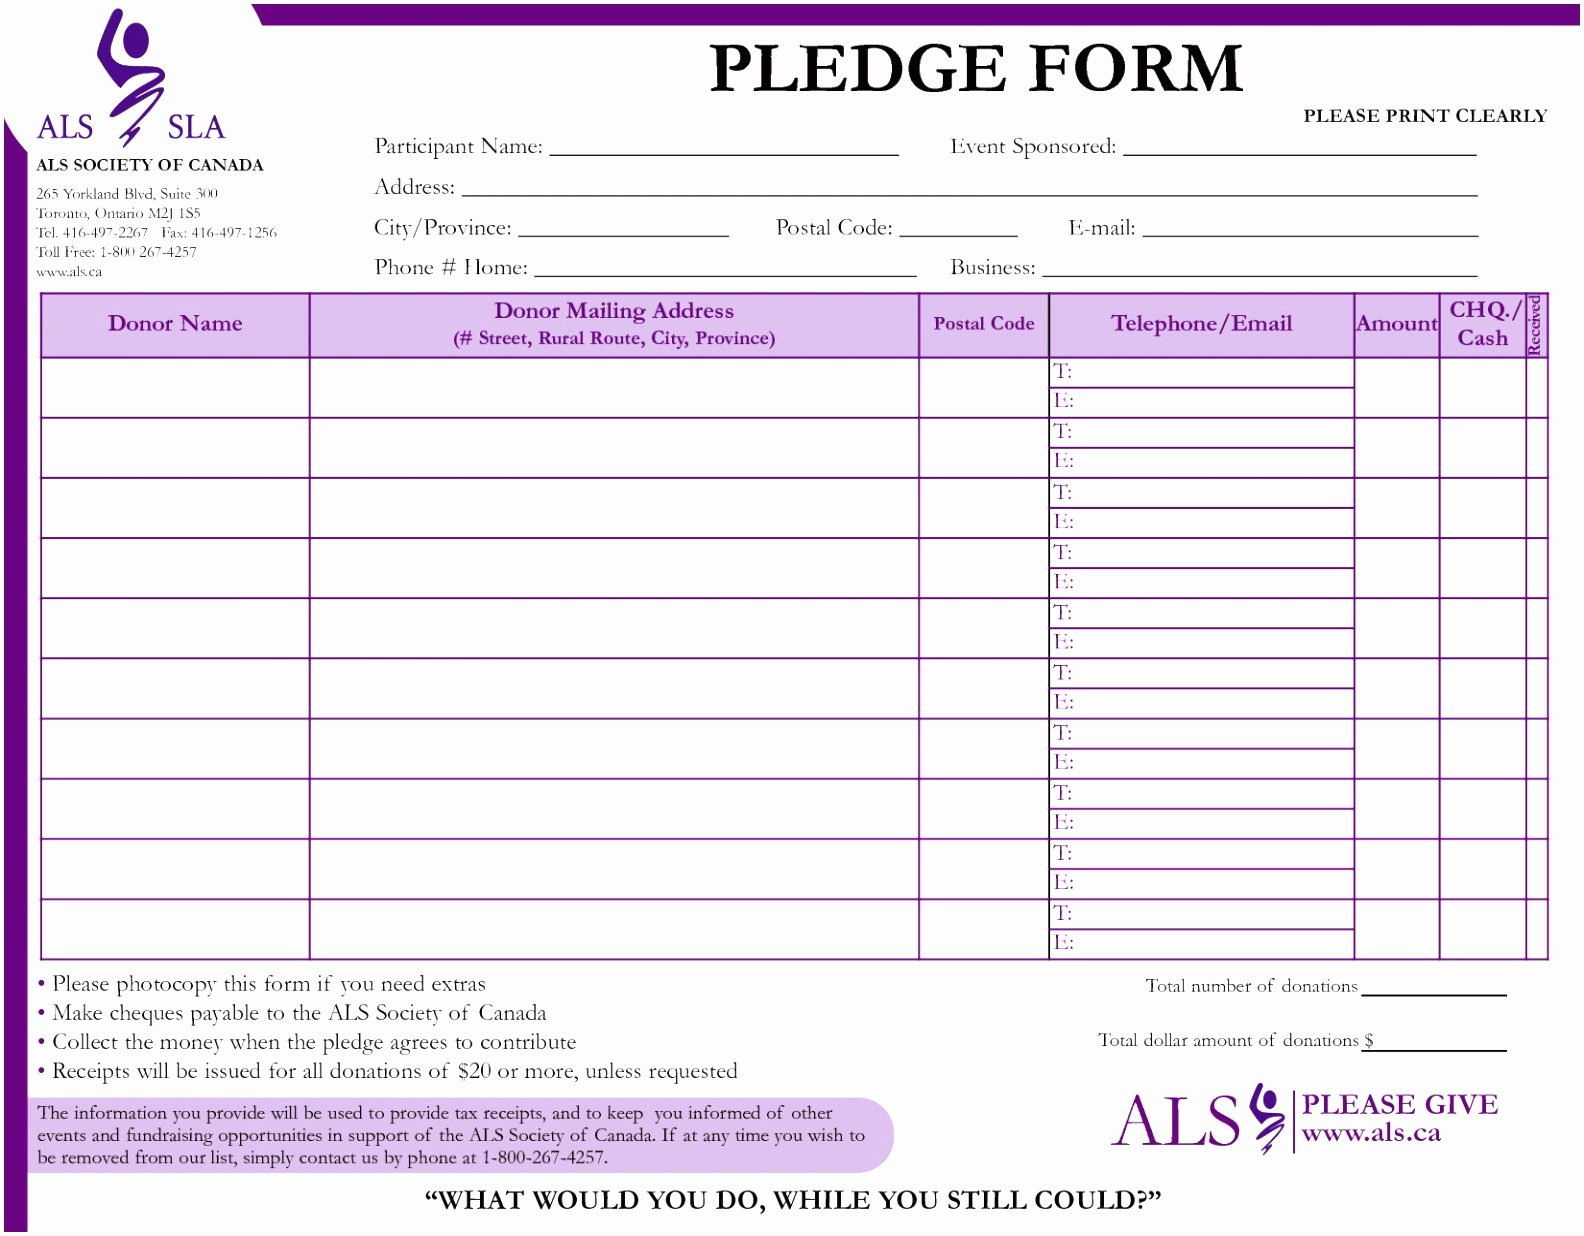 039 Pledge Card Template Word Best Of Fundraiser Form Pttyt Pertaining To Fundraising Pledge Card Template